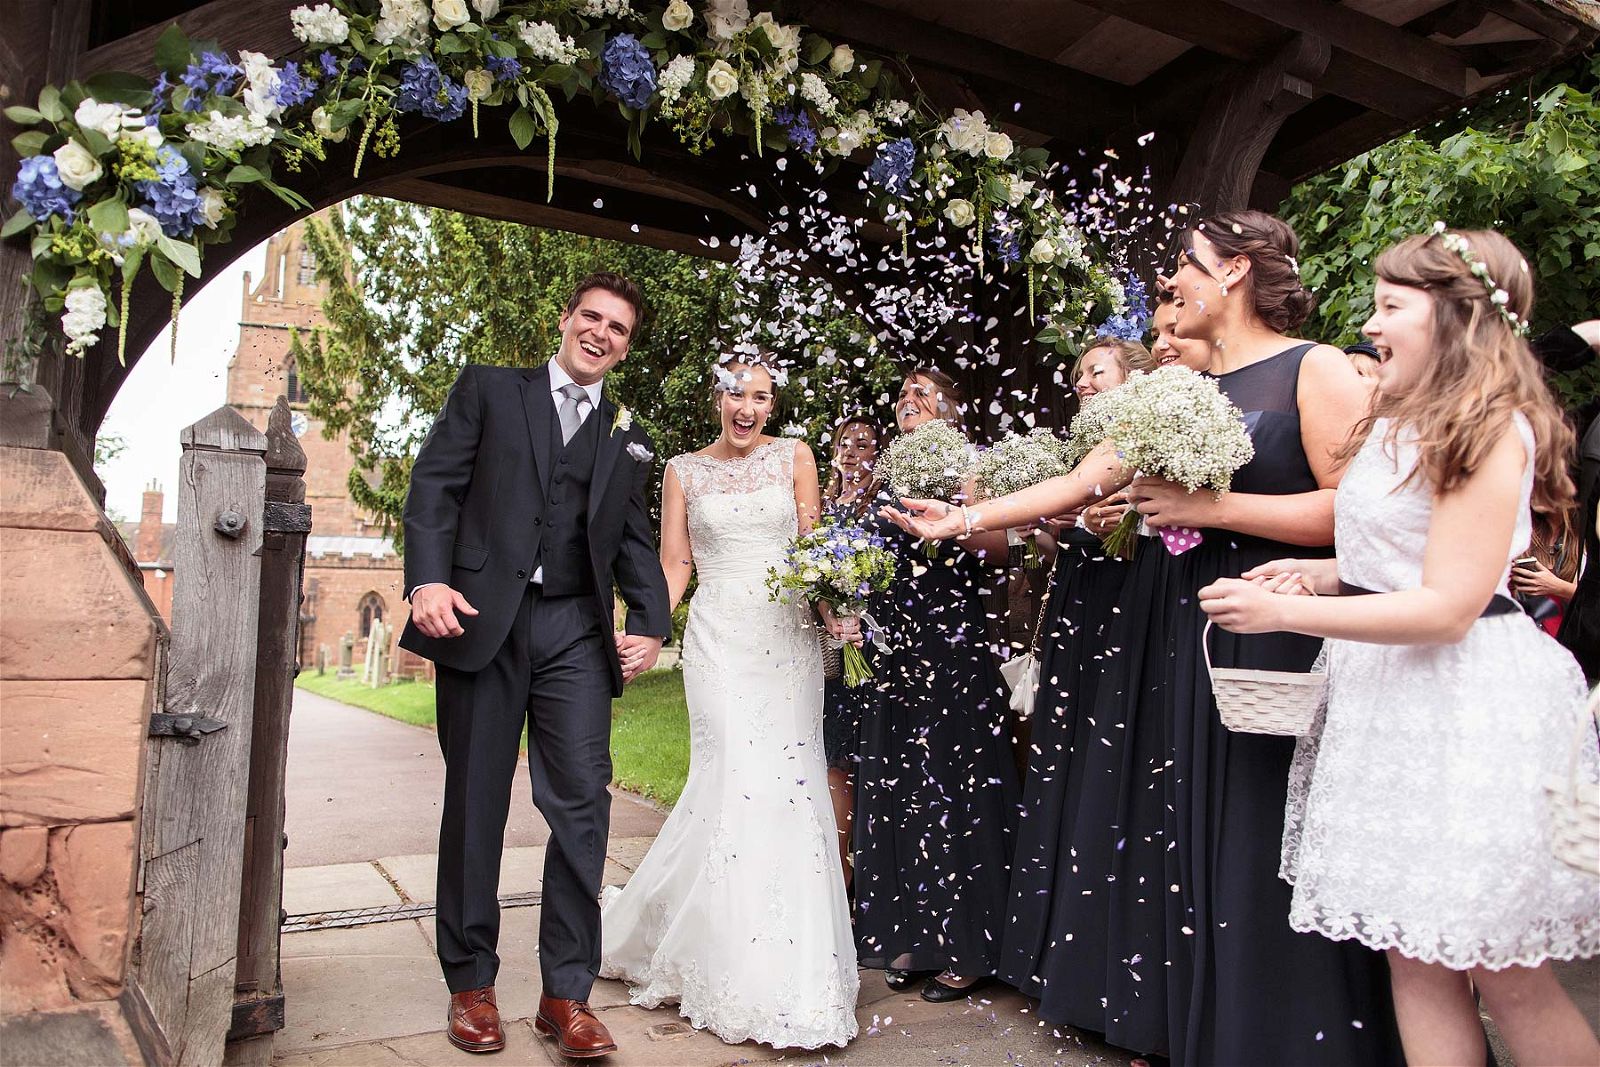 Fabulous confetti photograph as Bride and Groom leave St Chads Church in Pattingham by Pattingham Wedding Photographer Stuart James